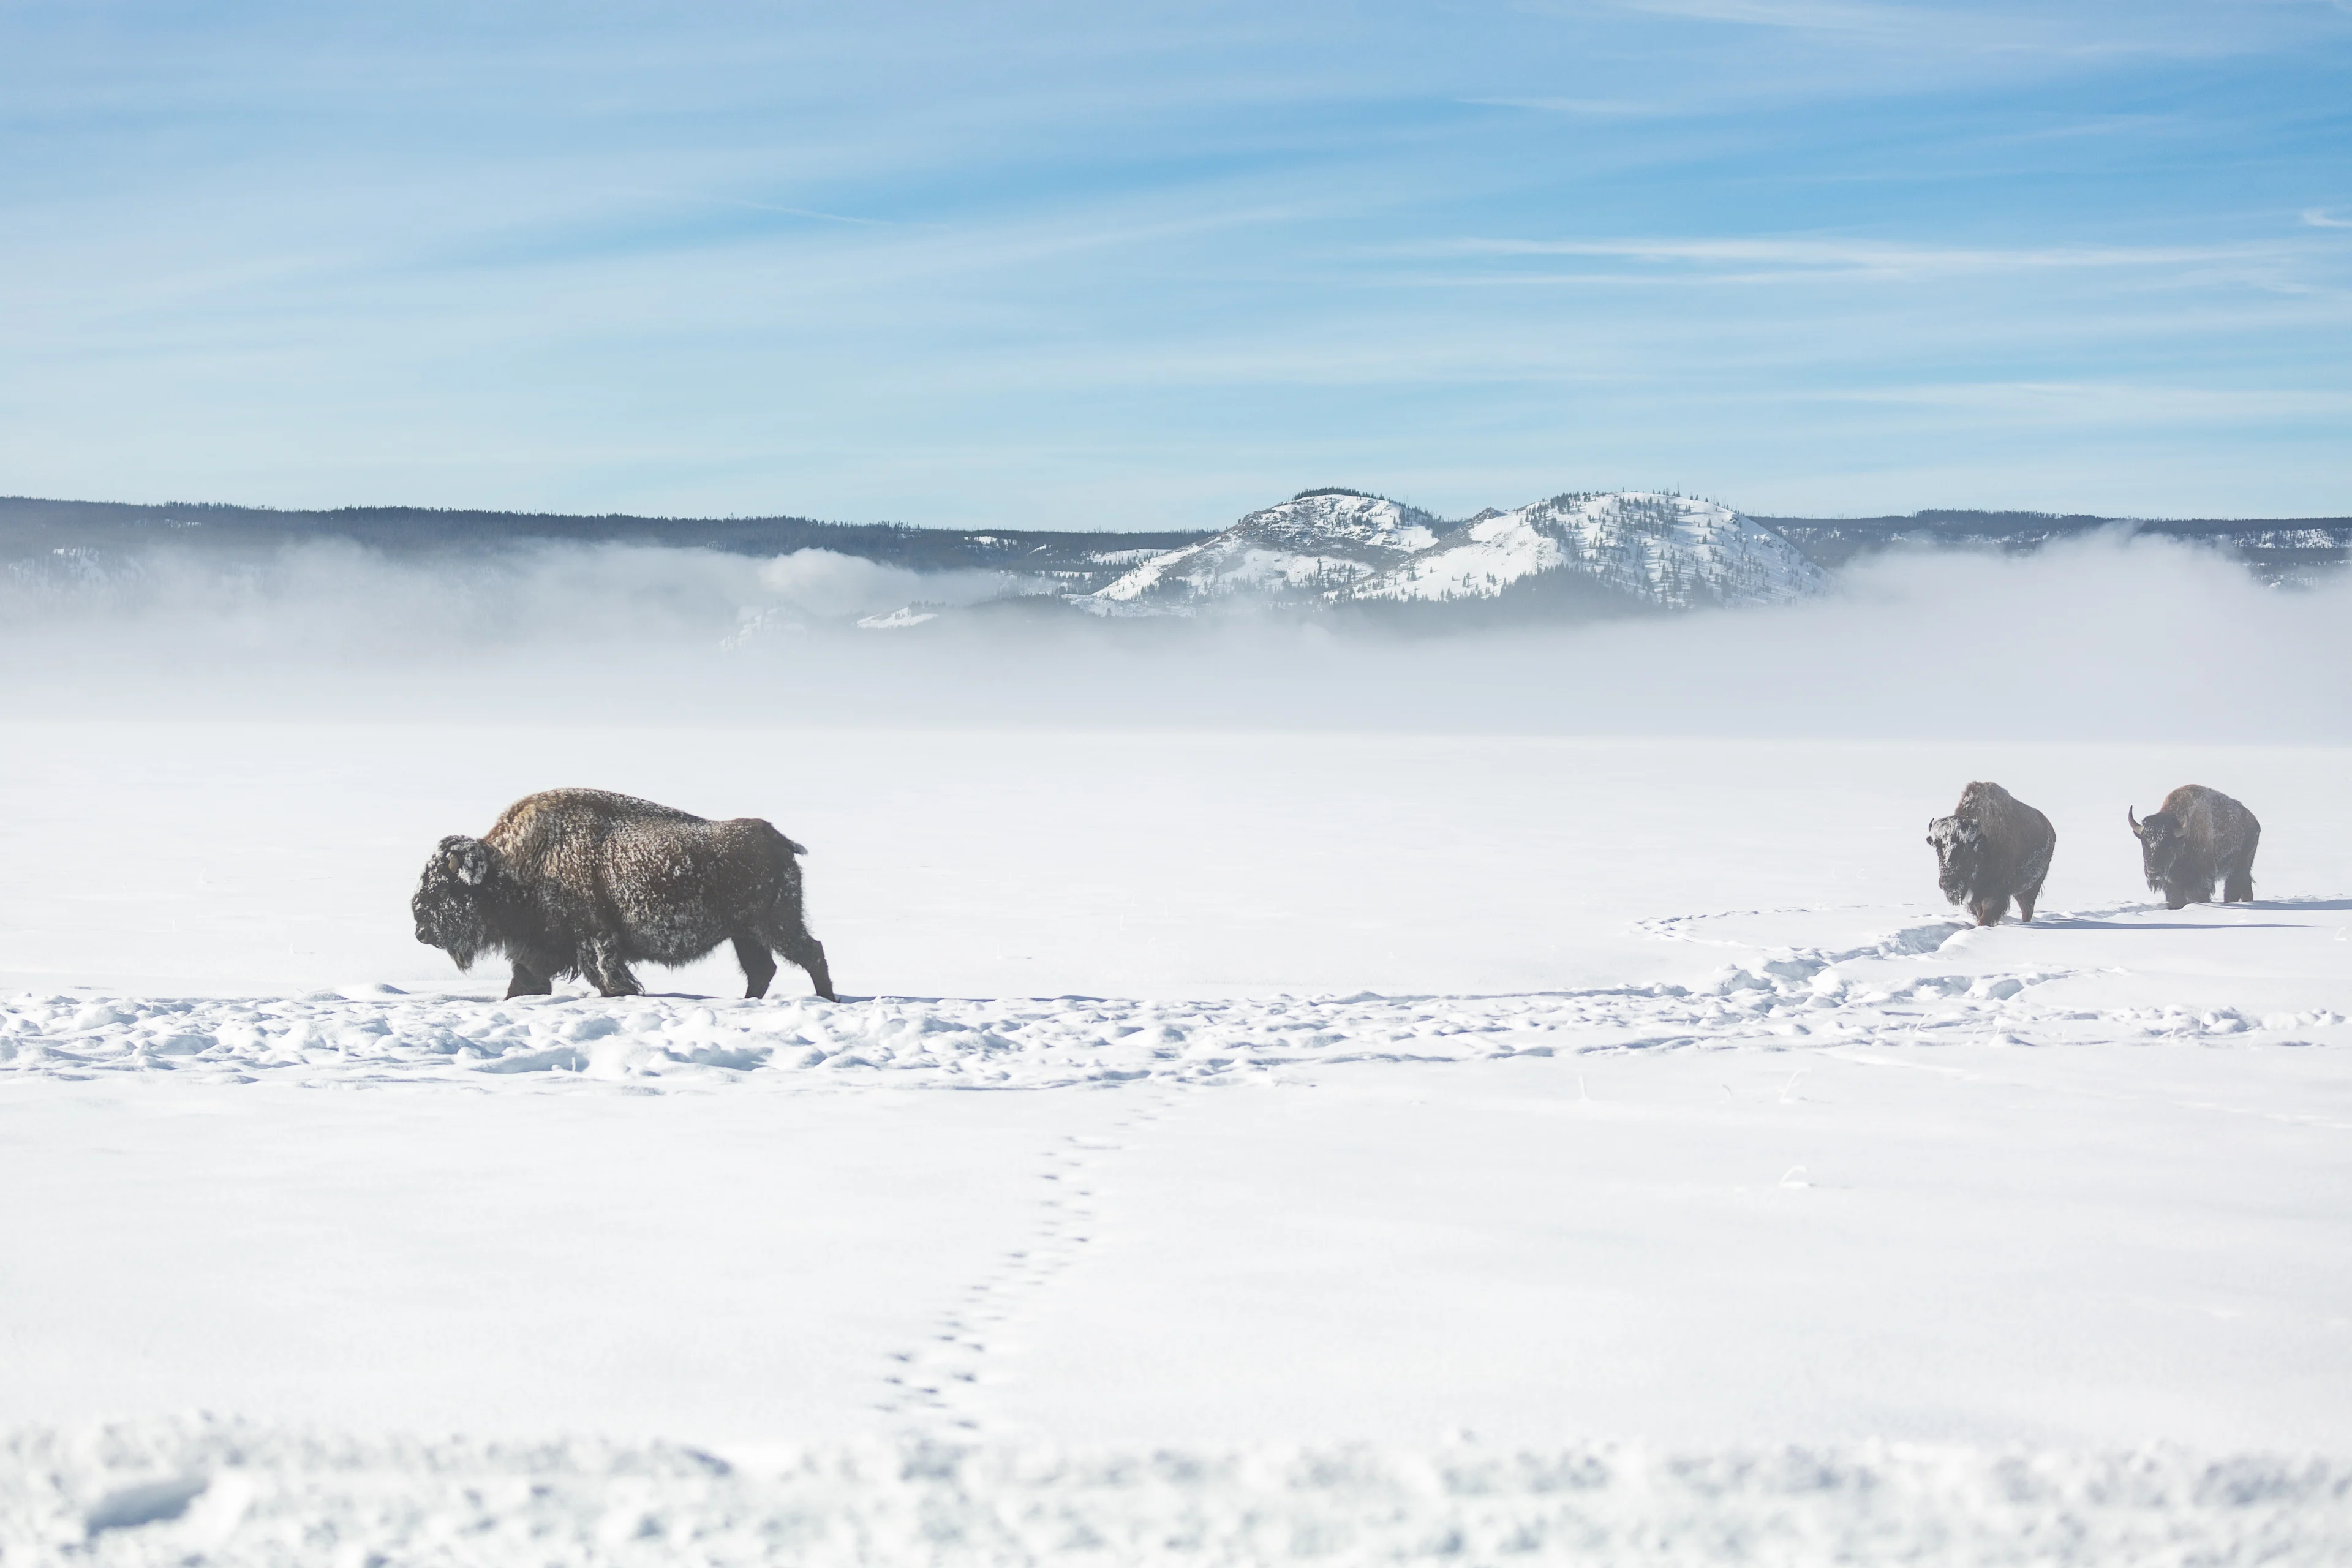 A trio of bison weathers the winter in Yellowstone National Park, Wyoming, USA. Taken by Patrick O'Brien.